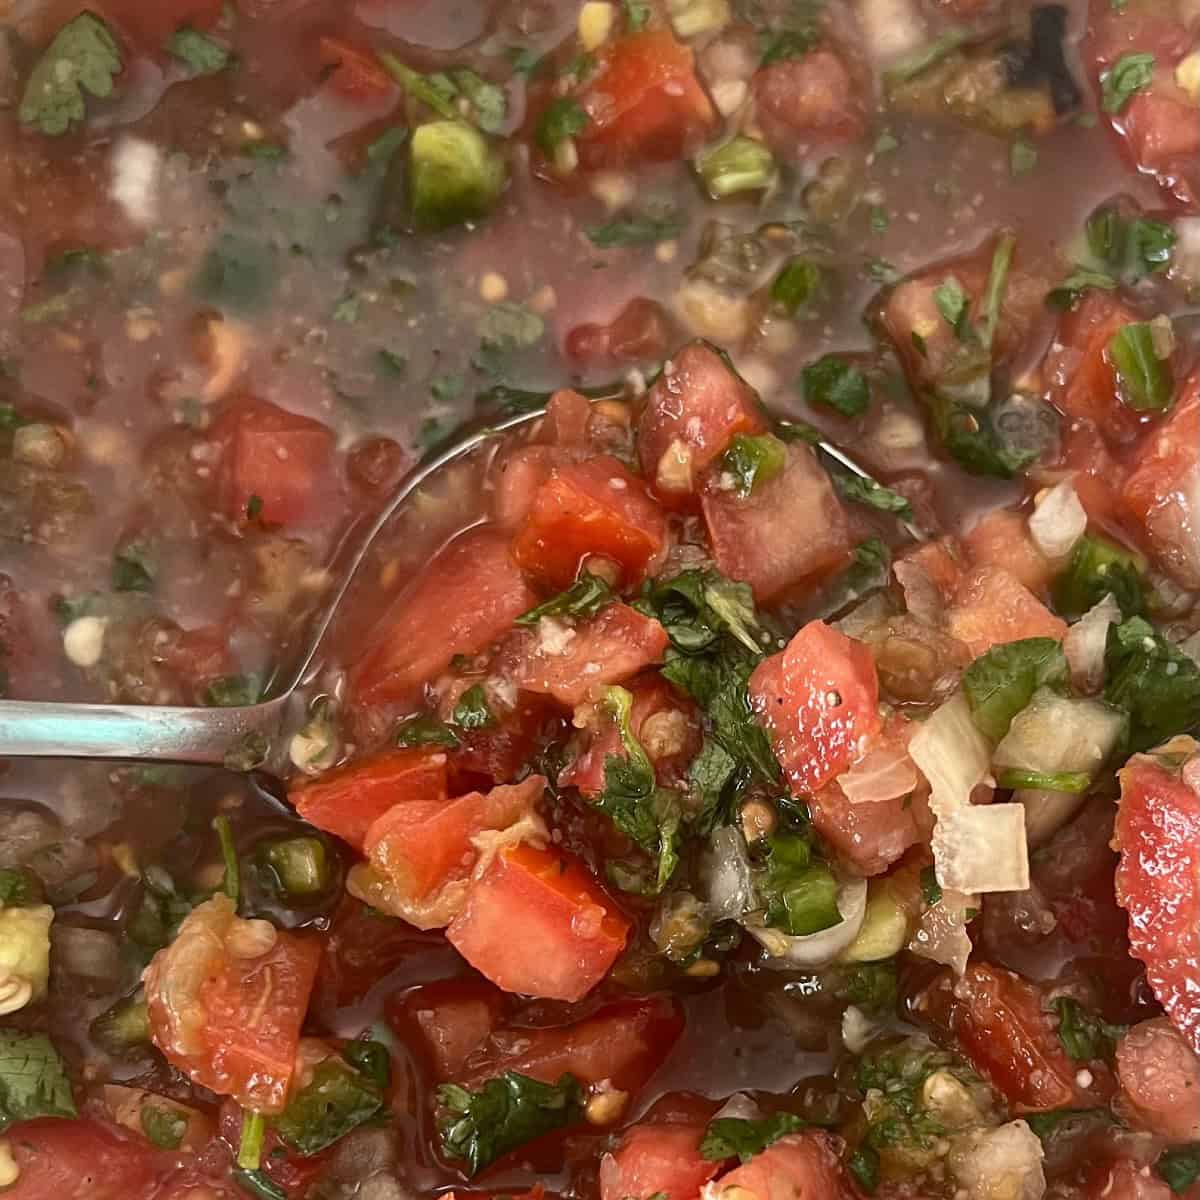 A bowl of salsa with a spoon in it. The salsa is a chunky mixture of chopped red tomatoes, onions, and cilantro